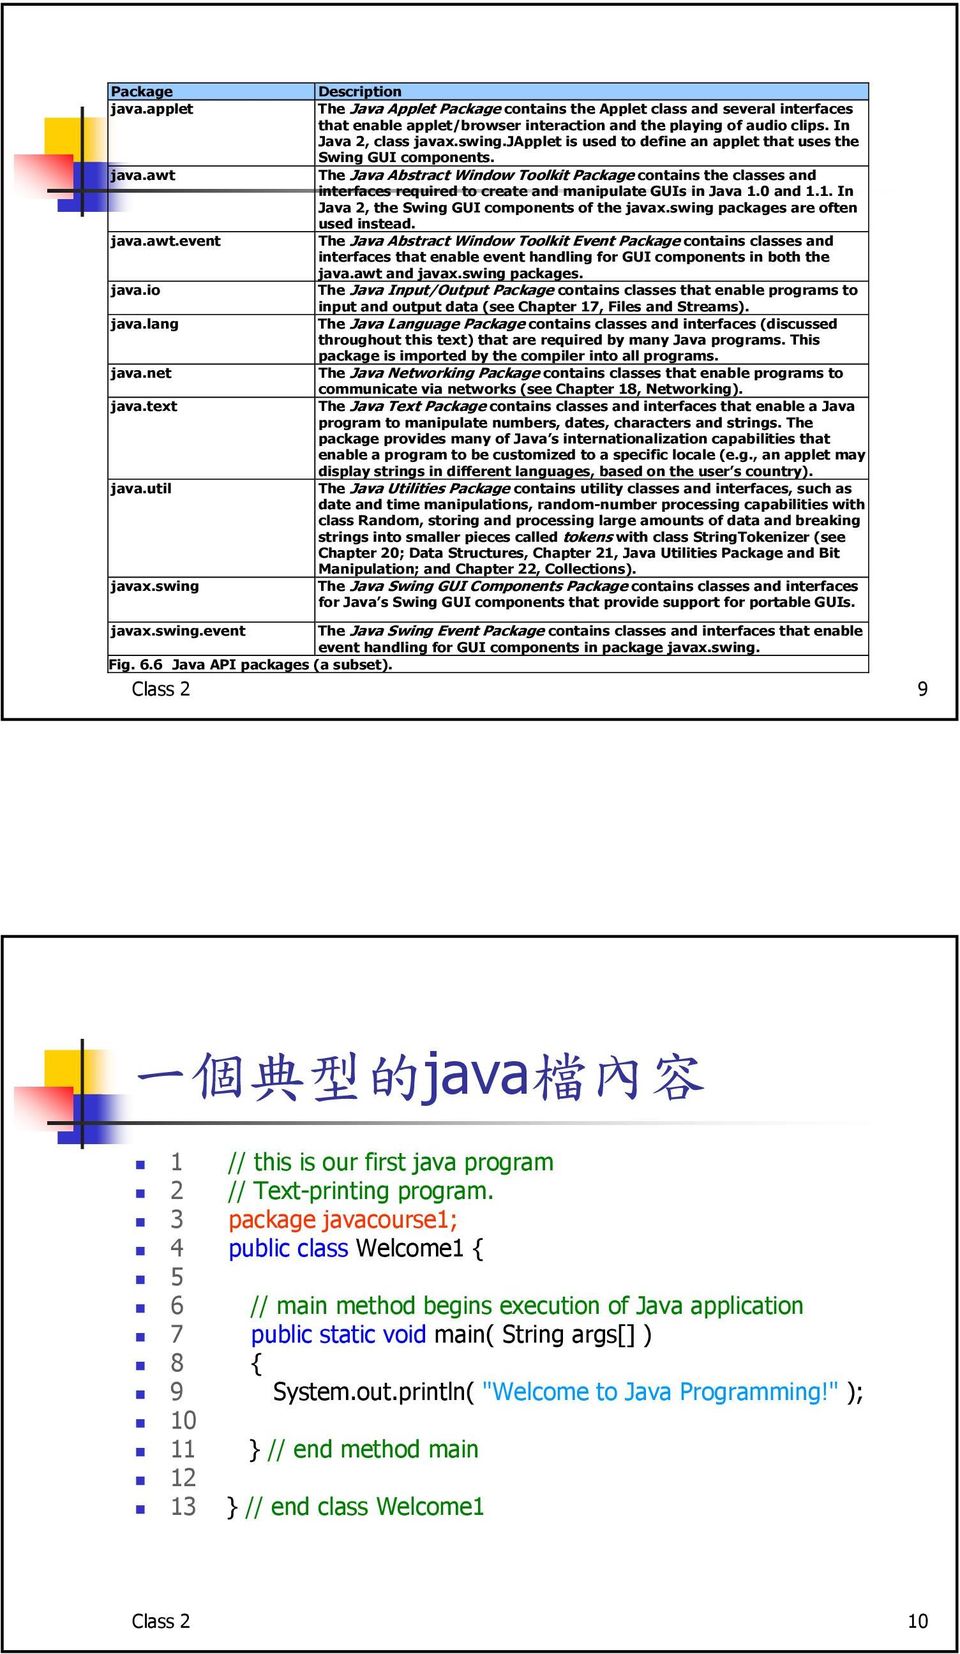 The Java Abstract Window Toolkit Package contains the classes and interfaces required to create and manipulate GUIs in Java 1.0 and 1.1. In Java 2, the Swing GUI components of the javax.